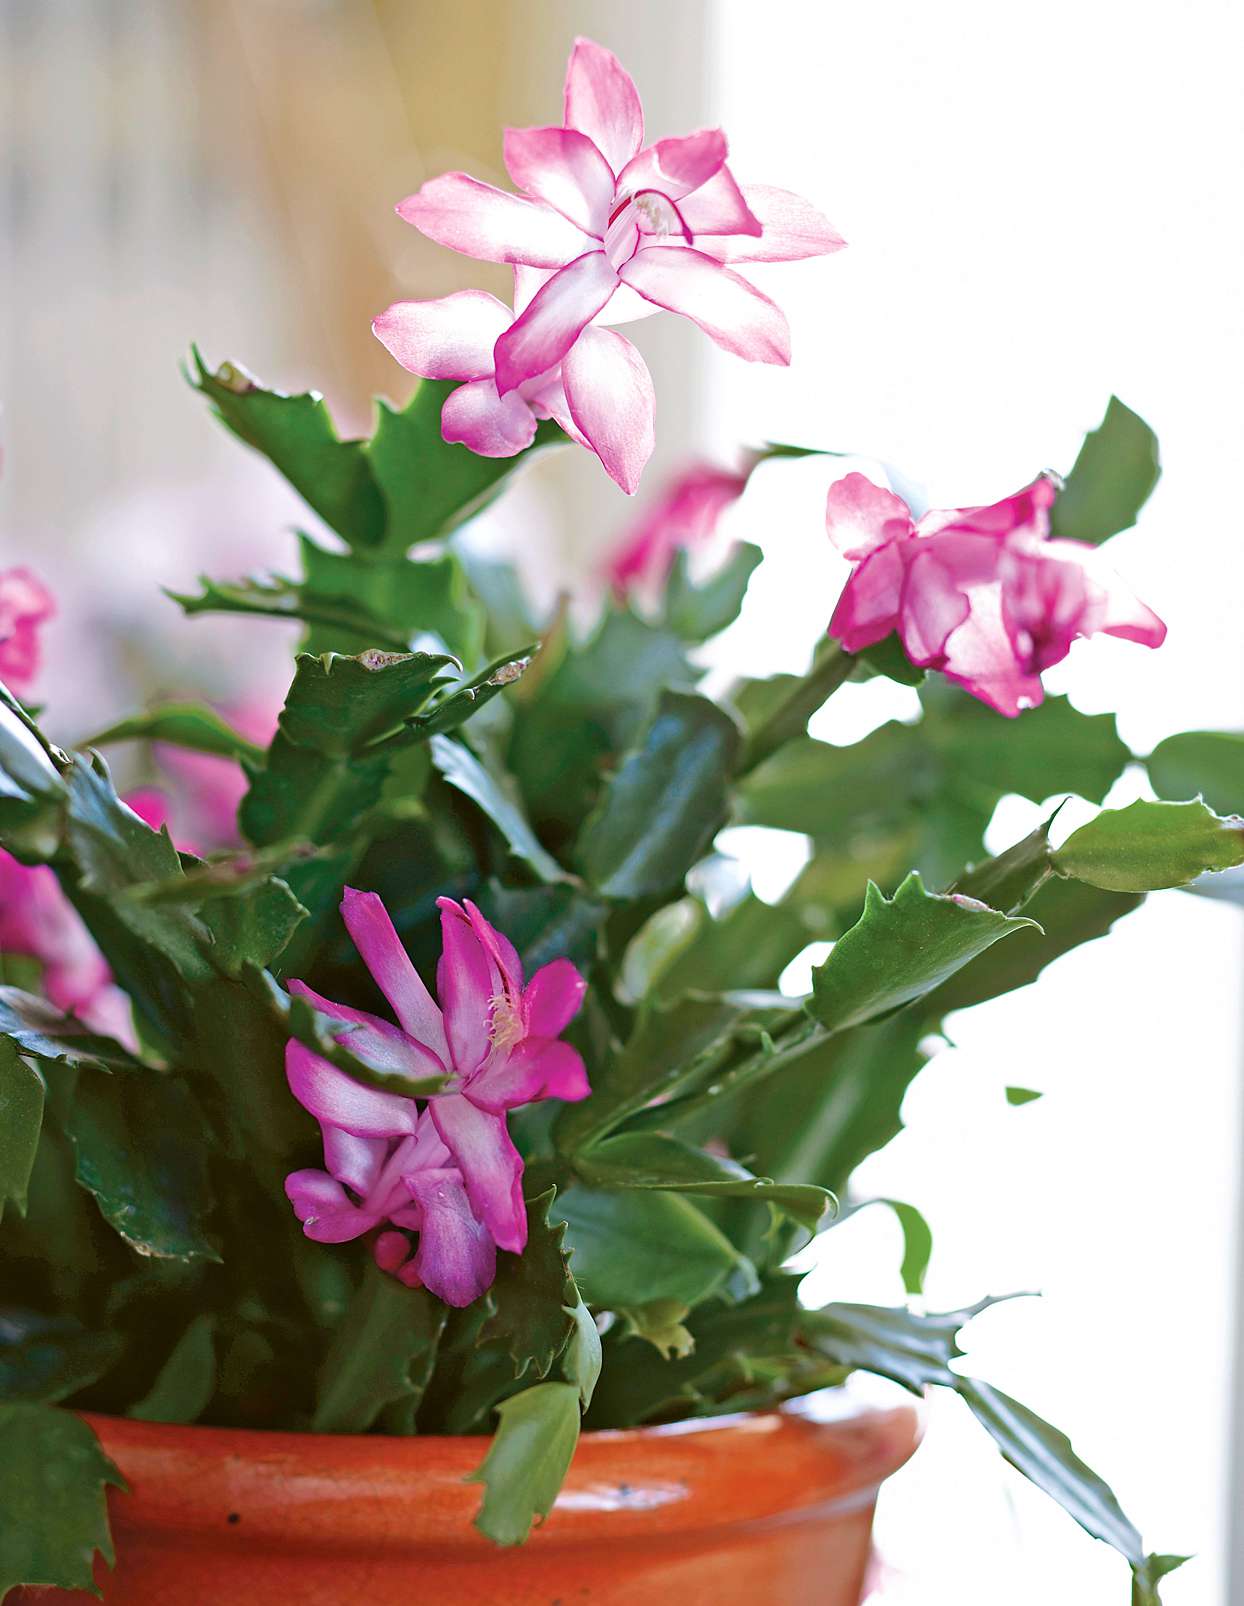 'Madame Butterfly' Christmas cactus